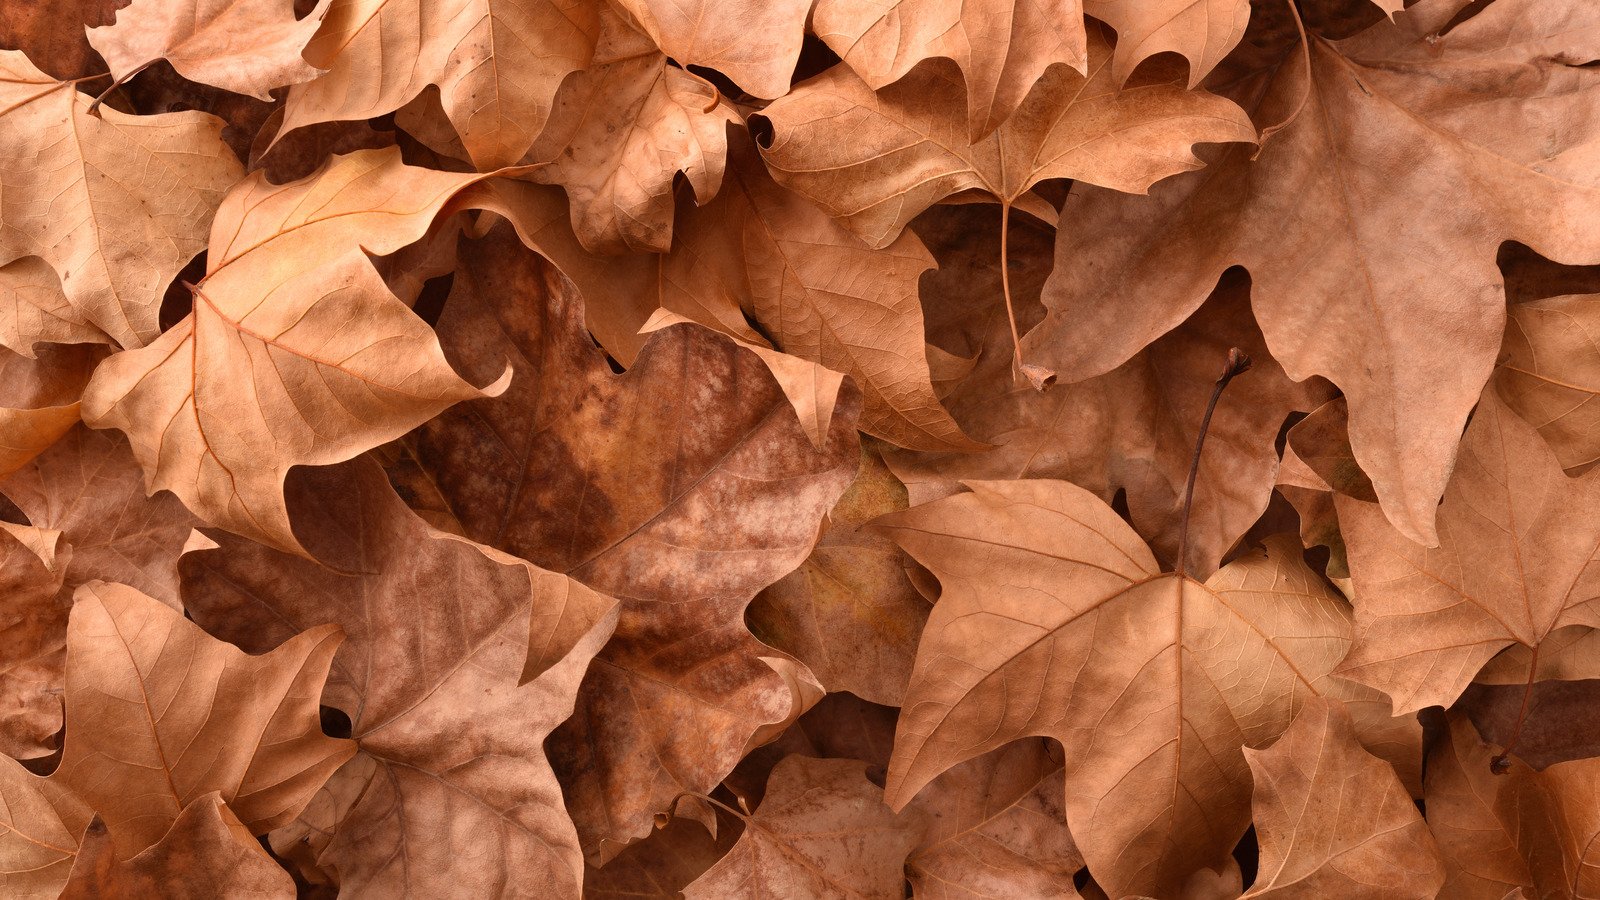 Creative Ways To To Dispose Of Dead Leaves In Fall